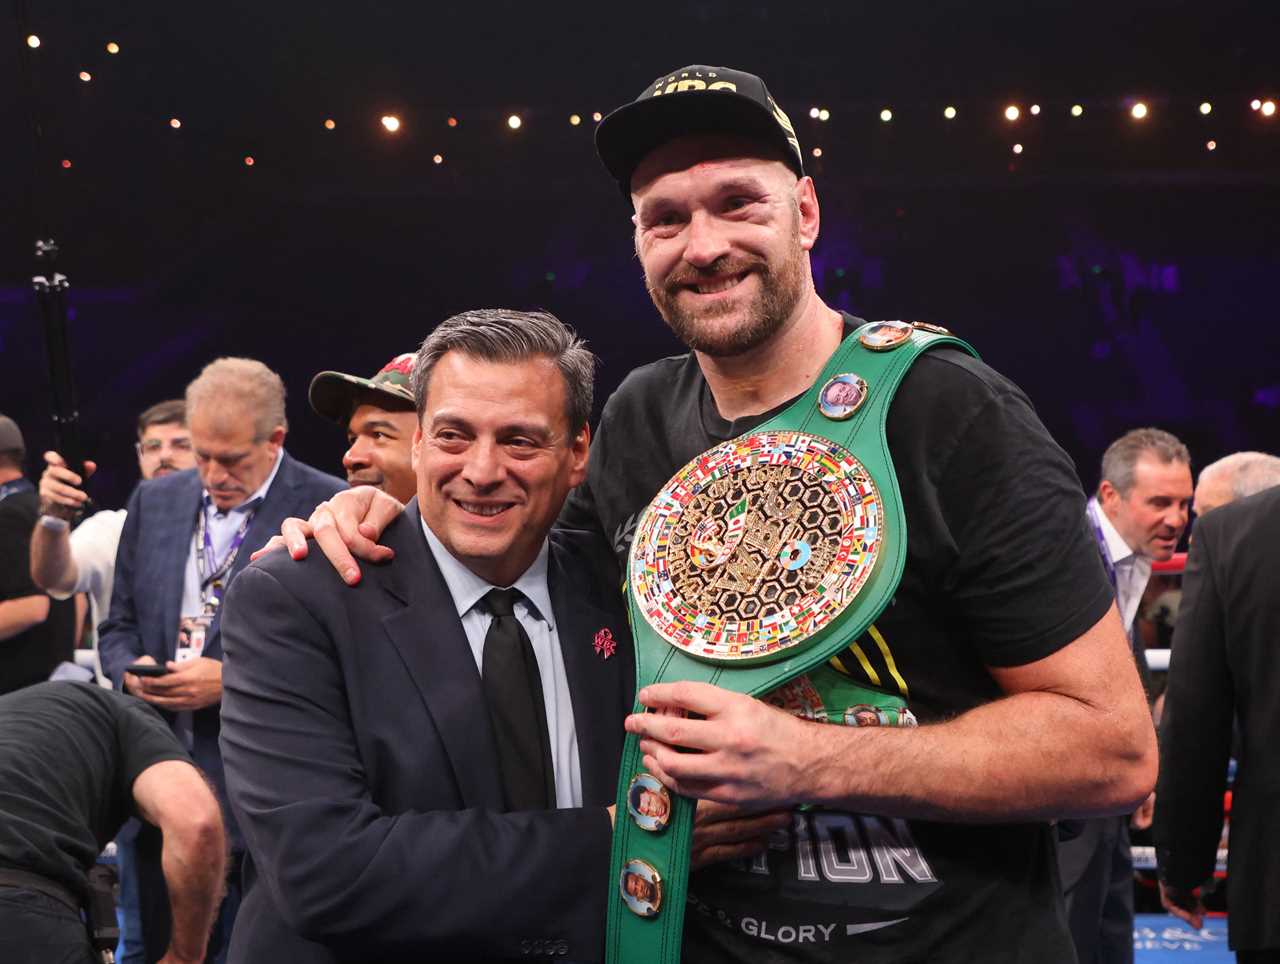 Major protocol change for Tyson Fury vs Oleksandr Usyk REJECTED after shock ’emergency petition’